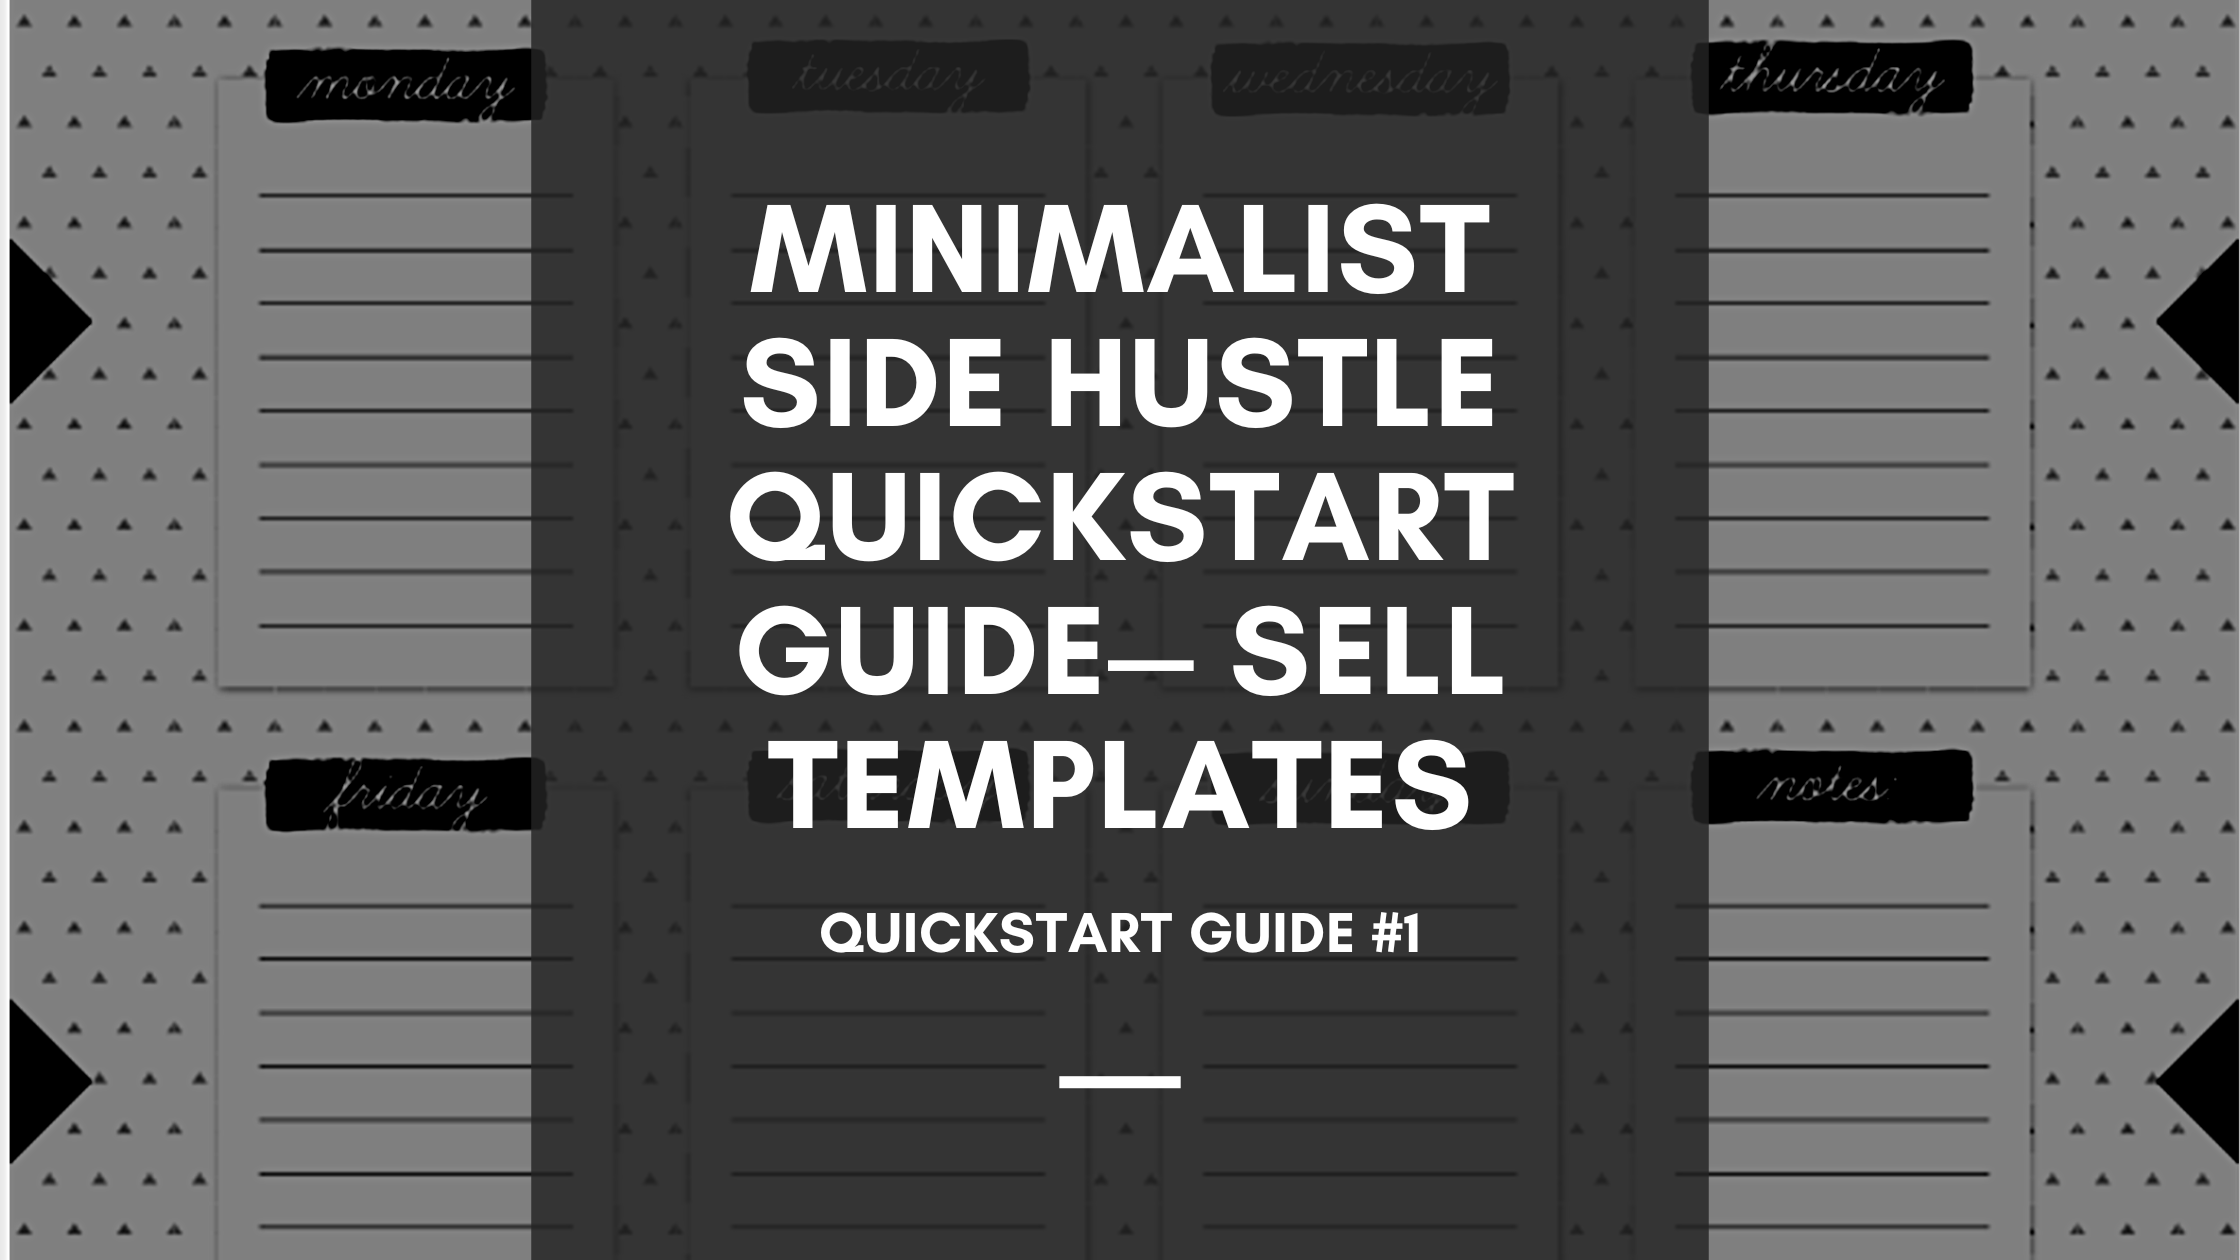 Guides & Templates